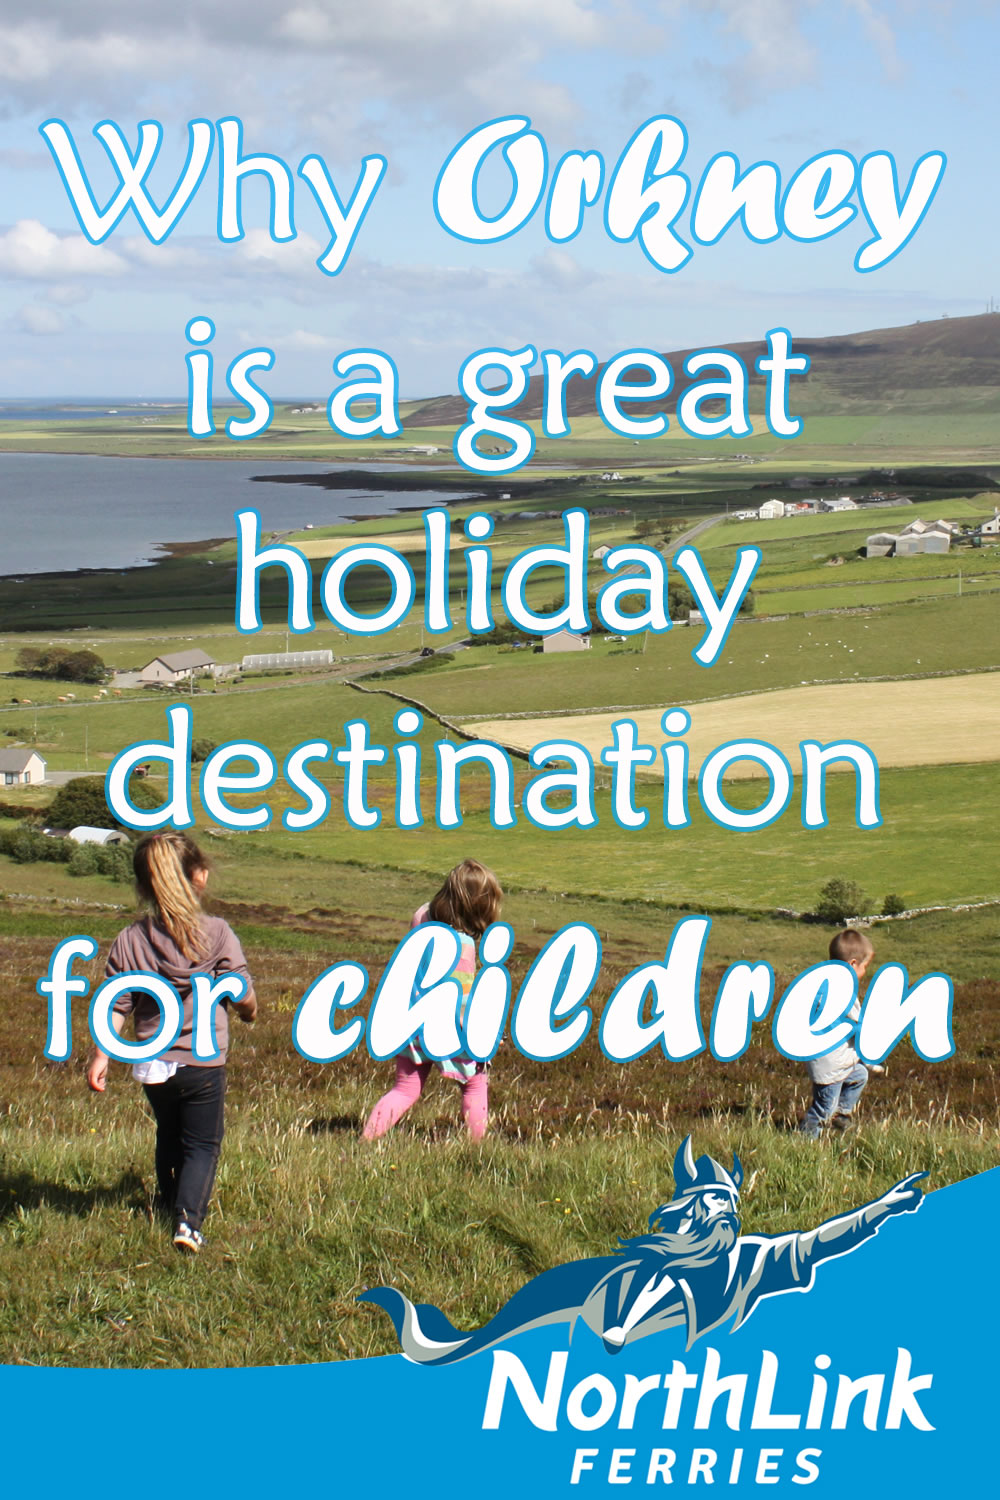 Why Orkney is a great holiday destination for children